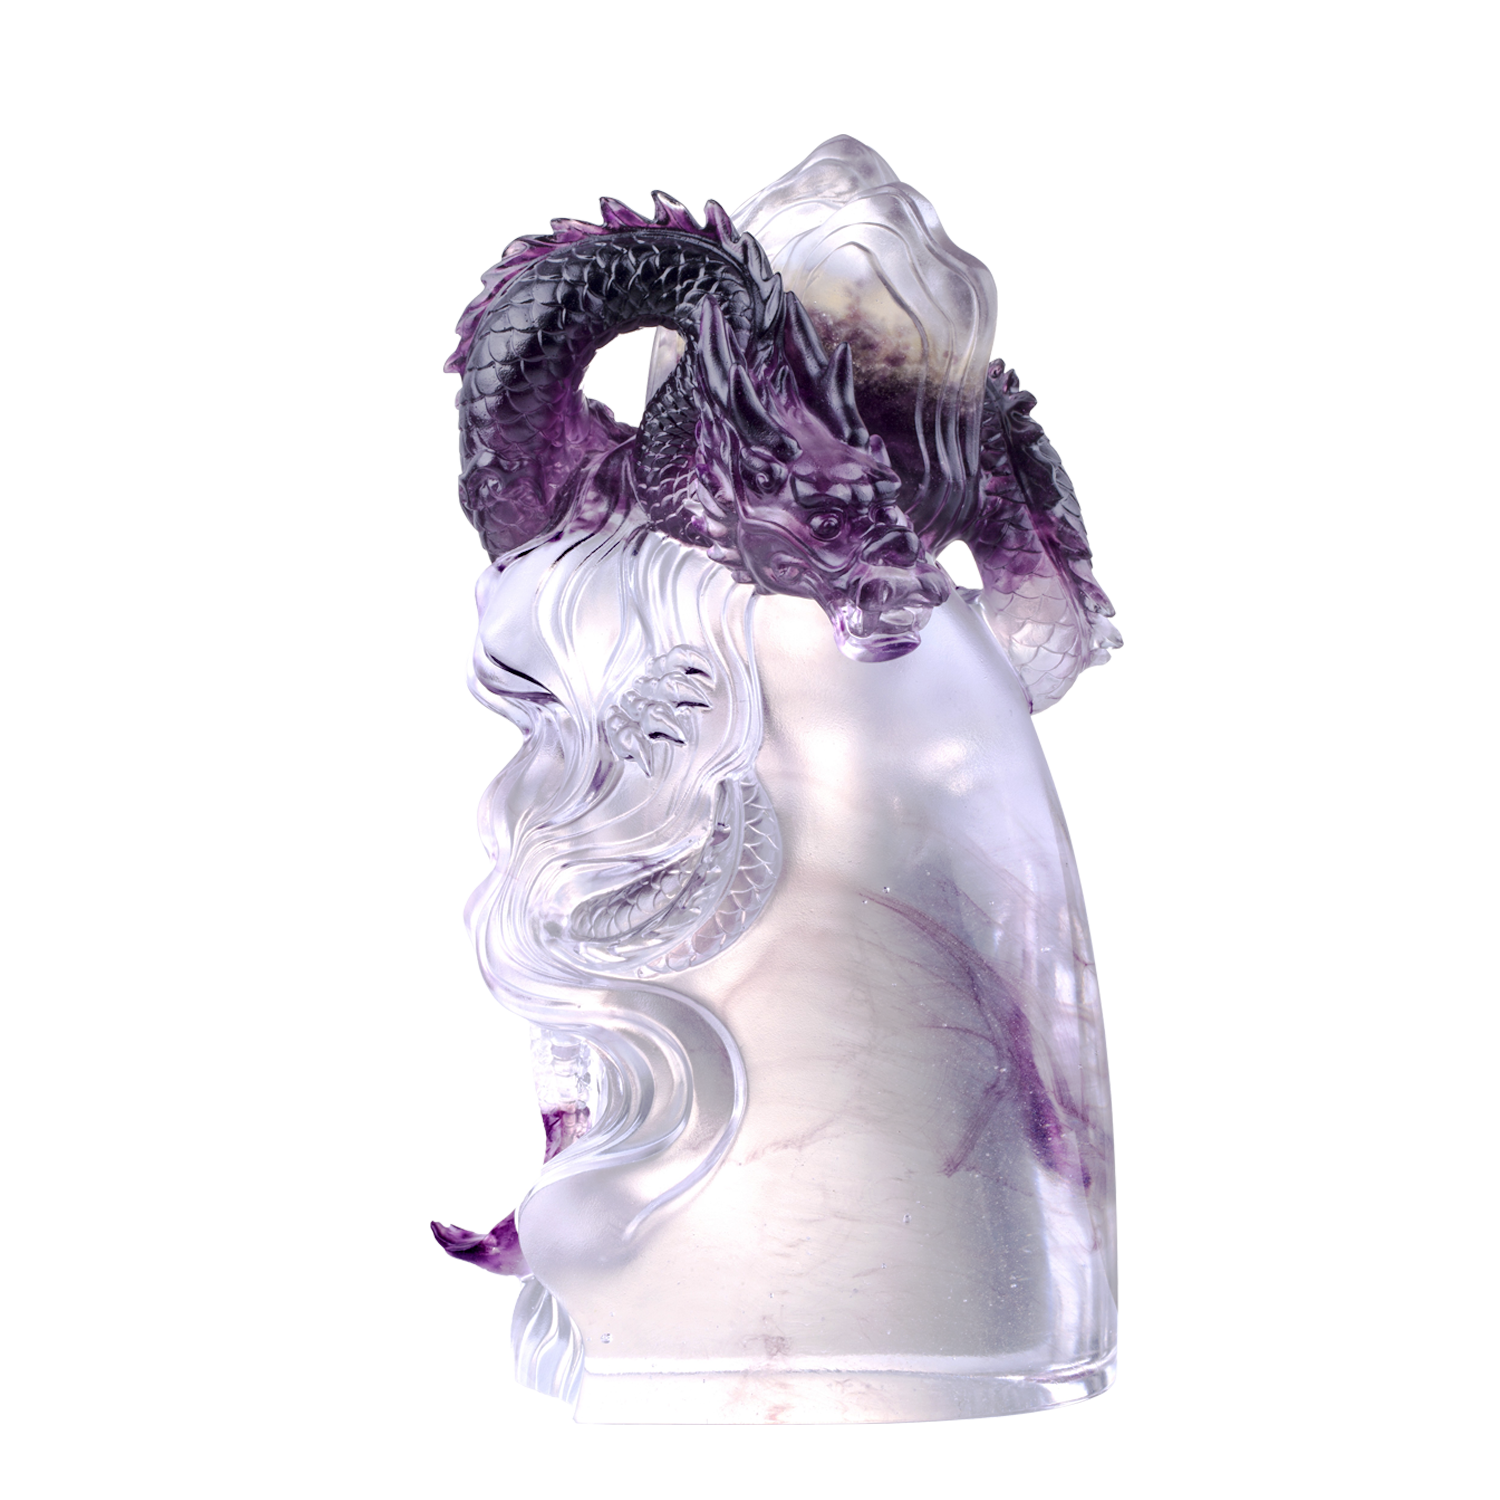 Dragon of Invincible (Unstoppable) - A Call From the Highest Heavens - LIULI Crystal Art